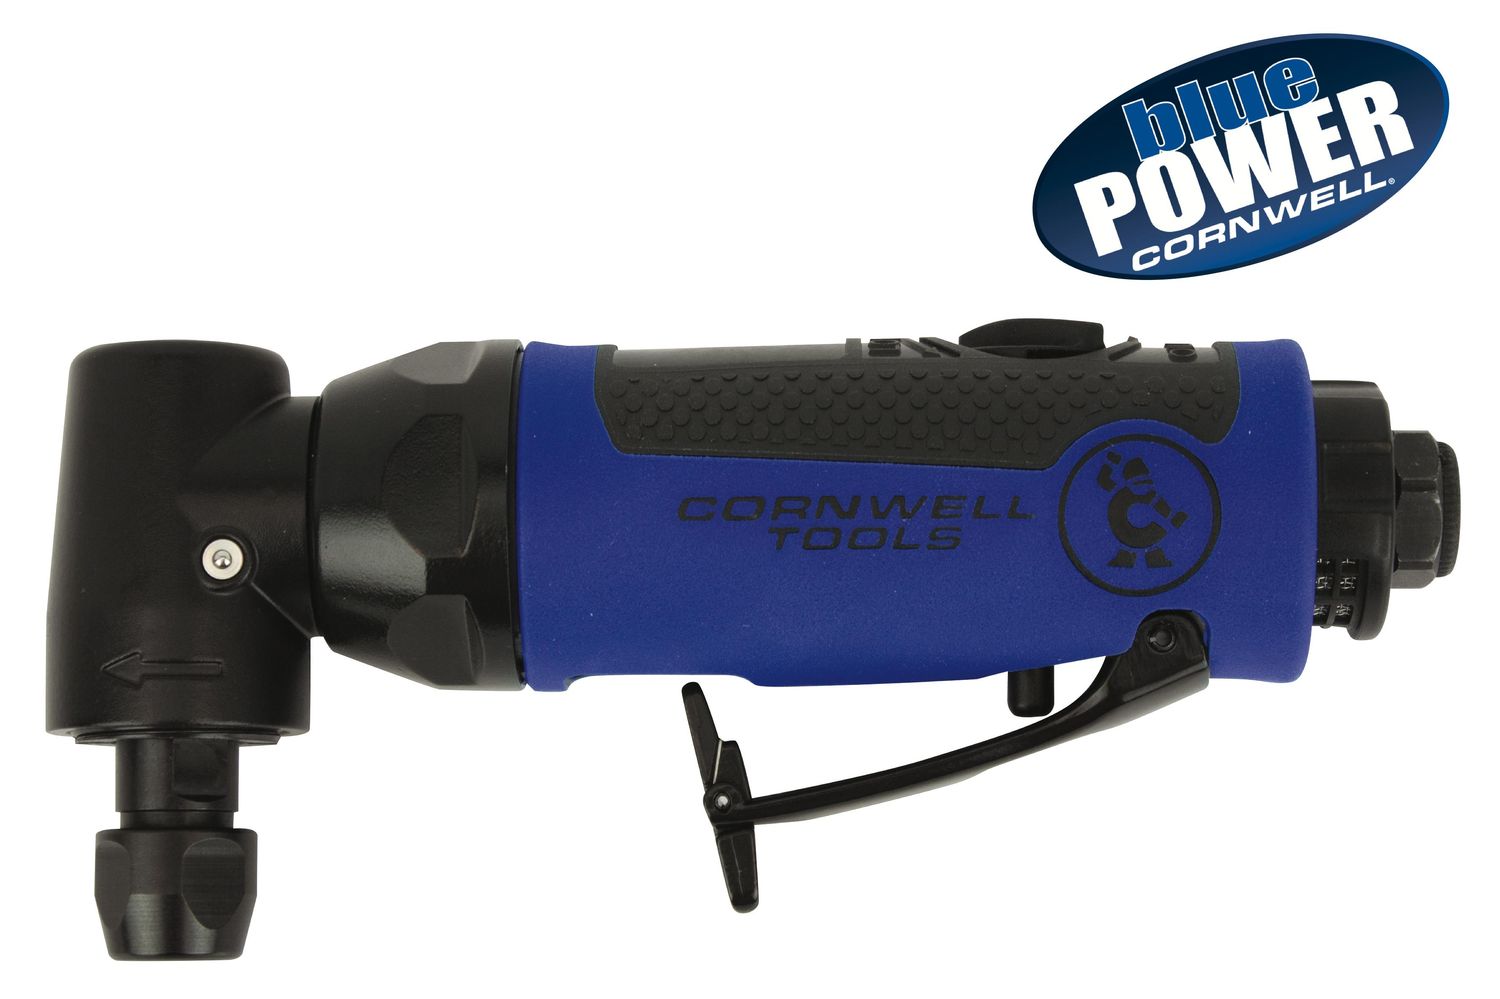 CAT540R - Cornwell® bluePOWER® Heavy-Duty Right Angle Die Grinder